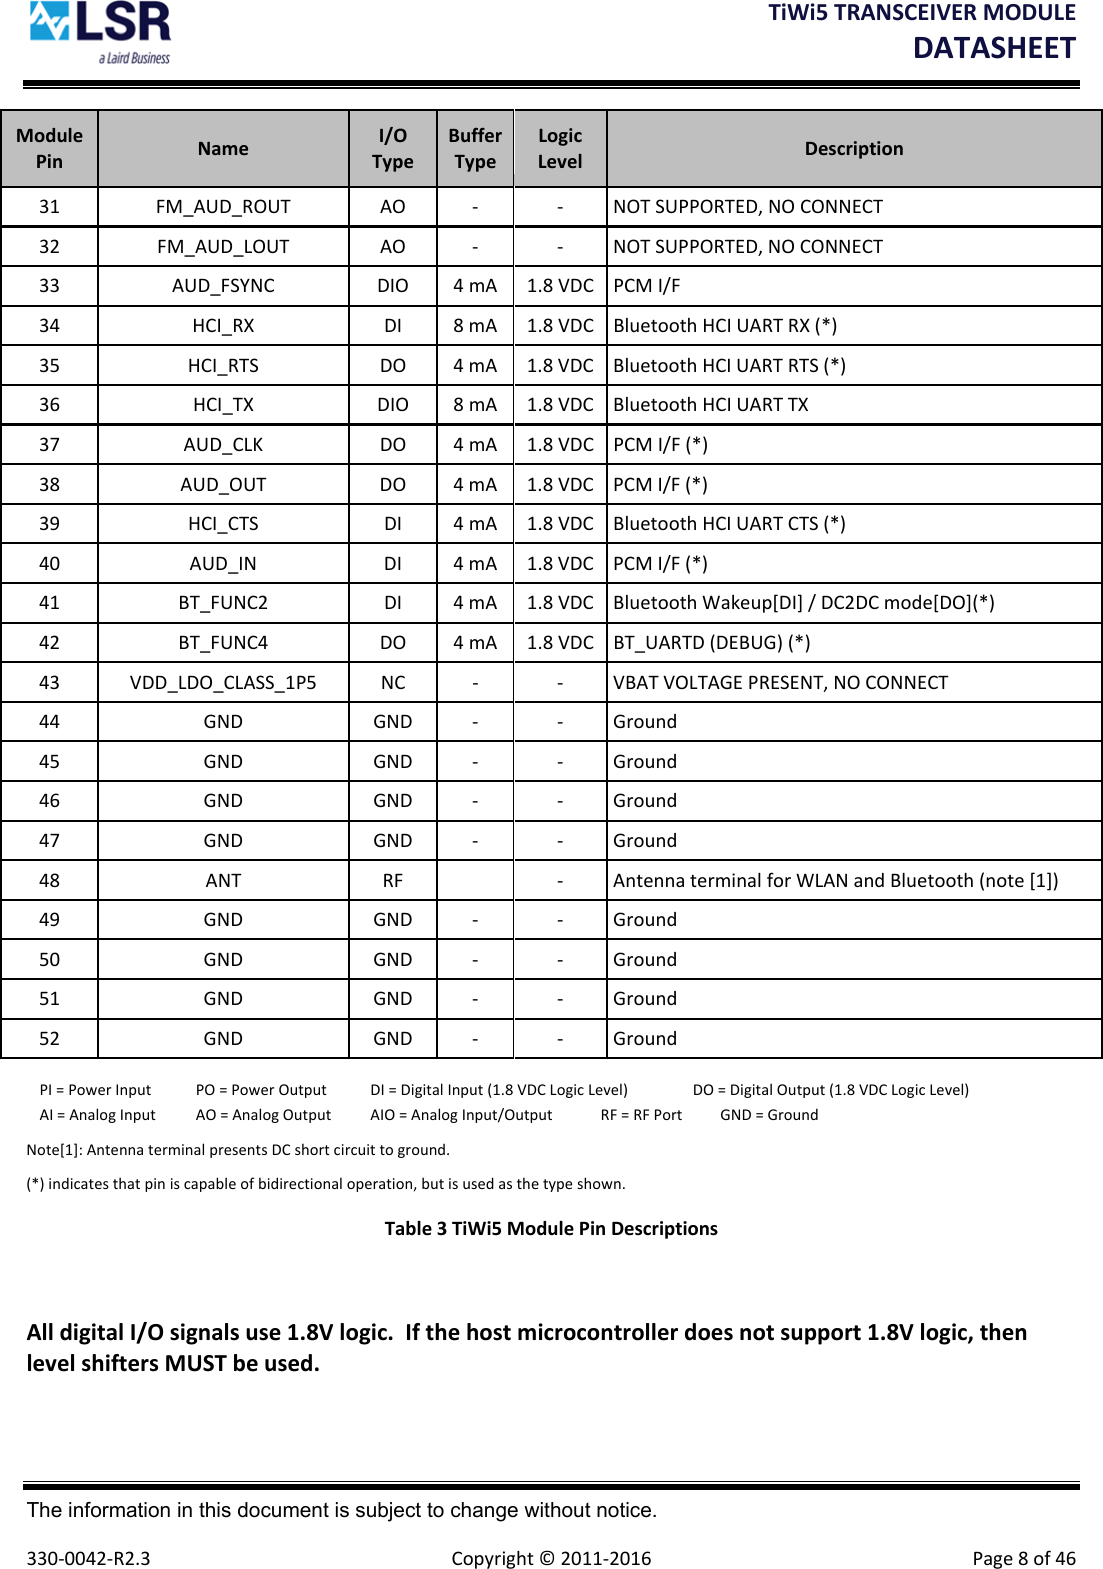 TiWi5TRANSCEIVERMODULEDATASHEET The information in this document is subject to change without notice.  330‐0042‐R2.3  Copyright©2011‐2016 Page8of46ModulePin Name I/OTypeBufferTypeLogicLevel Description31 FM_AUD_ROUT AO ‐ ‐ NOTSUPPORTED,NOCONNECT32 FM_AUD_LOUT AO ‐ ‐ NOTSUPPORTED,NO CONNECT33 AUD_FSYNC DIO 4mA 1.8VDC PCMI/F34 HCI_RX DI 8mA 1.8VDC BluetoothHCI UARTRX(*)35 HCI_RTS DO 4mA 1.8VDC BluetoothHCI UARTRTS(*)36 HCI_TX DIO 8mA 1.8VDC BluetoothHCI UART TX37 AUD_CLK DO 4mA 1.8VDC PCMI/F (*)38 AUD_OUT DO 4mA 1.8VDC PCMI/F(*)39 HCI_CTS DI 4mA 1.8VDC BluetoothHCI UARTCTS(*)40 AUD_IN DI 4mA 1.8VDC PCMI/F (*)41 BT_FUNC2 DI 4mA 1.8VDC BluetoothWakeup[DI] /DC2DCmode[DO](*)42 BT_FUNC4 DO 4mA 1.8VDC BT_UARTD(DEBUG)(*)43 VDD_LDO_CLASS_1P5 NC ‐ ‐ VBATVOLTAGEPRESENT,NOCONNECT44 GND GND ‐ ‐ Ground45 GND GND ‐ ‐ Ground46 GND GND ‐ ‐ Ground47 GND GND ‐ ‐ Ground48 ANT RF ‐ AntennaterminalforWLANandBluetooth(note[1])49 GND GND ‐ ‐ Ground50 GND GND ‐ ‐ Ground51 GND GND ‐ ‐ Ground52 GND GND ‐ ‐ GroundPI=PowerInput PO=PowerOutput DI=DigitalInput(1.8VDCLogicLevel) DO=DigitalOutput(1.8VDCLogicLevel) AI=AnalogInput AO=AnalogOutput AIO=AnalogInput/Output RF=RFPort GND=Ground Note[1]:AntennaterminalpresentsDCshortcircuittoground.(*)indicatesthatpiniscapableofbidirectionaloperation,butisusedasthetypeshown.Table3TiWi5ModulePinDescriptionsAlldigitalI/Osignalsuse1.8Vlogic.Ifthehostmicrocontrollerdoesnotsupport1.8Vlogic,thenlevelshiftersMUSTbeused.